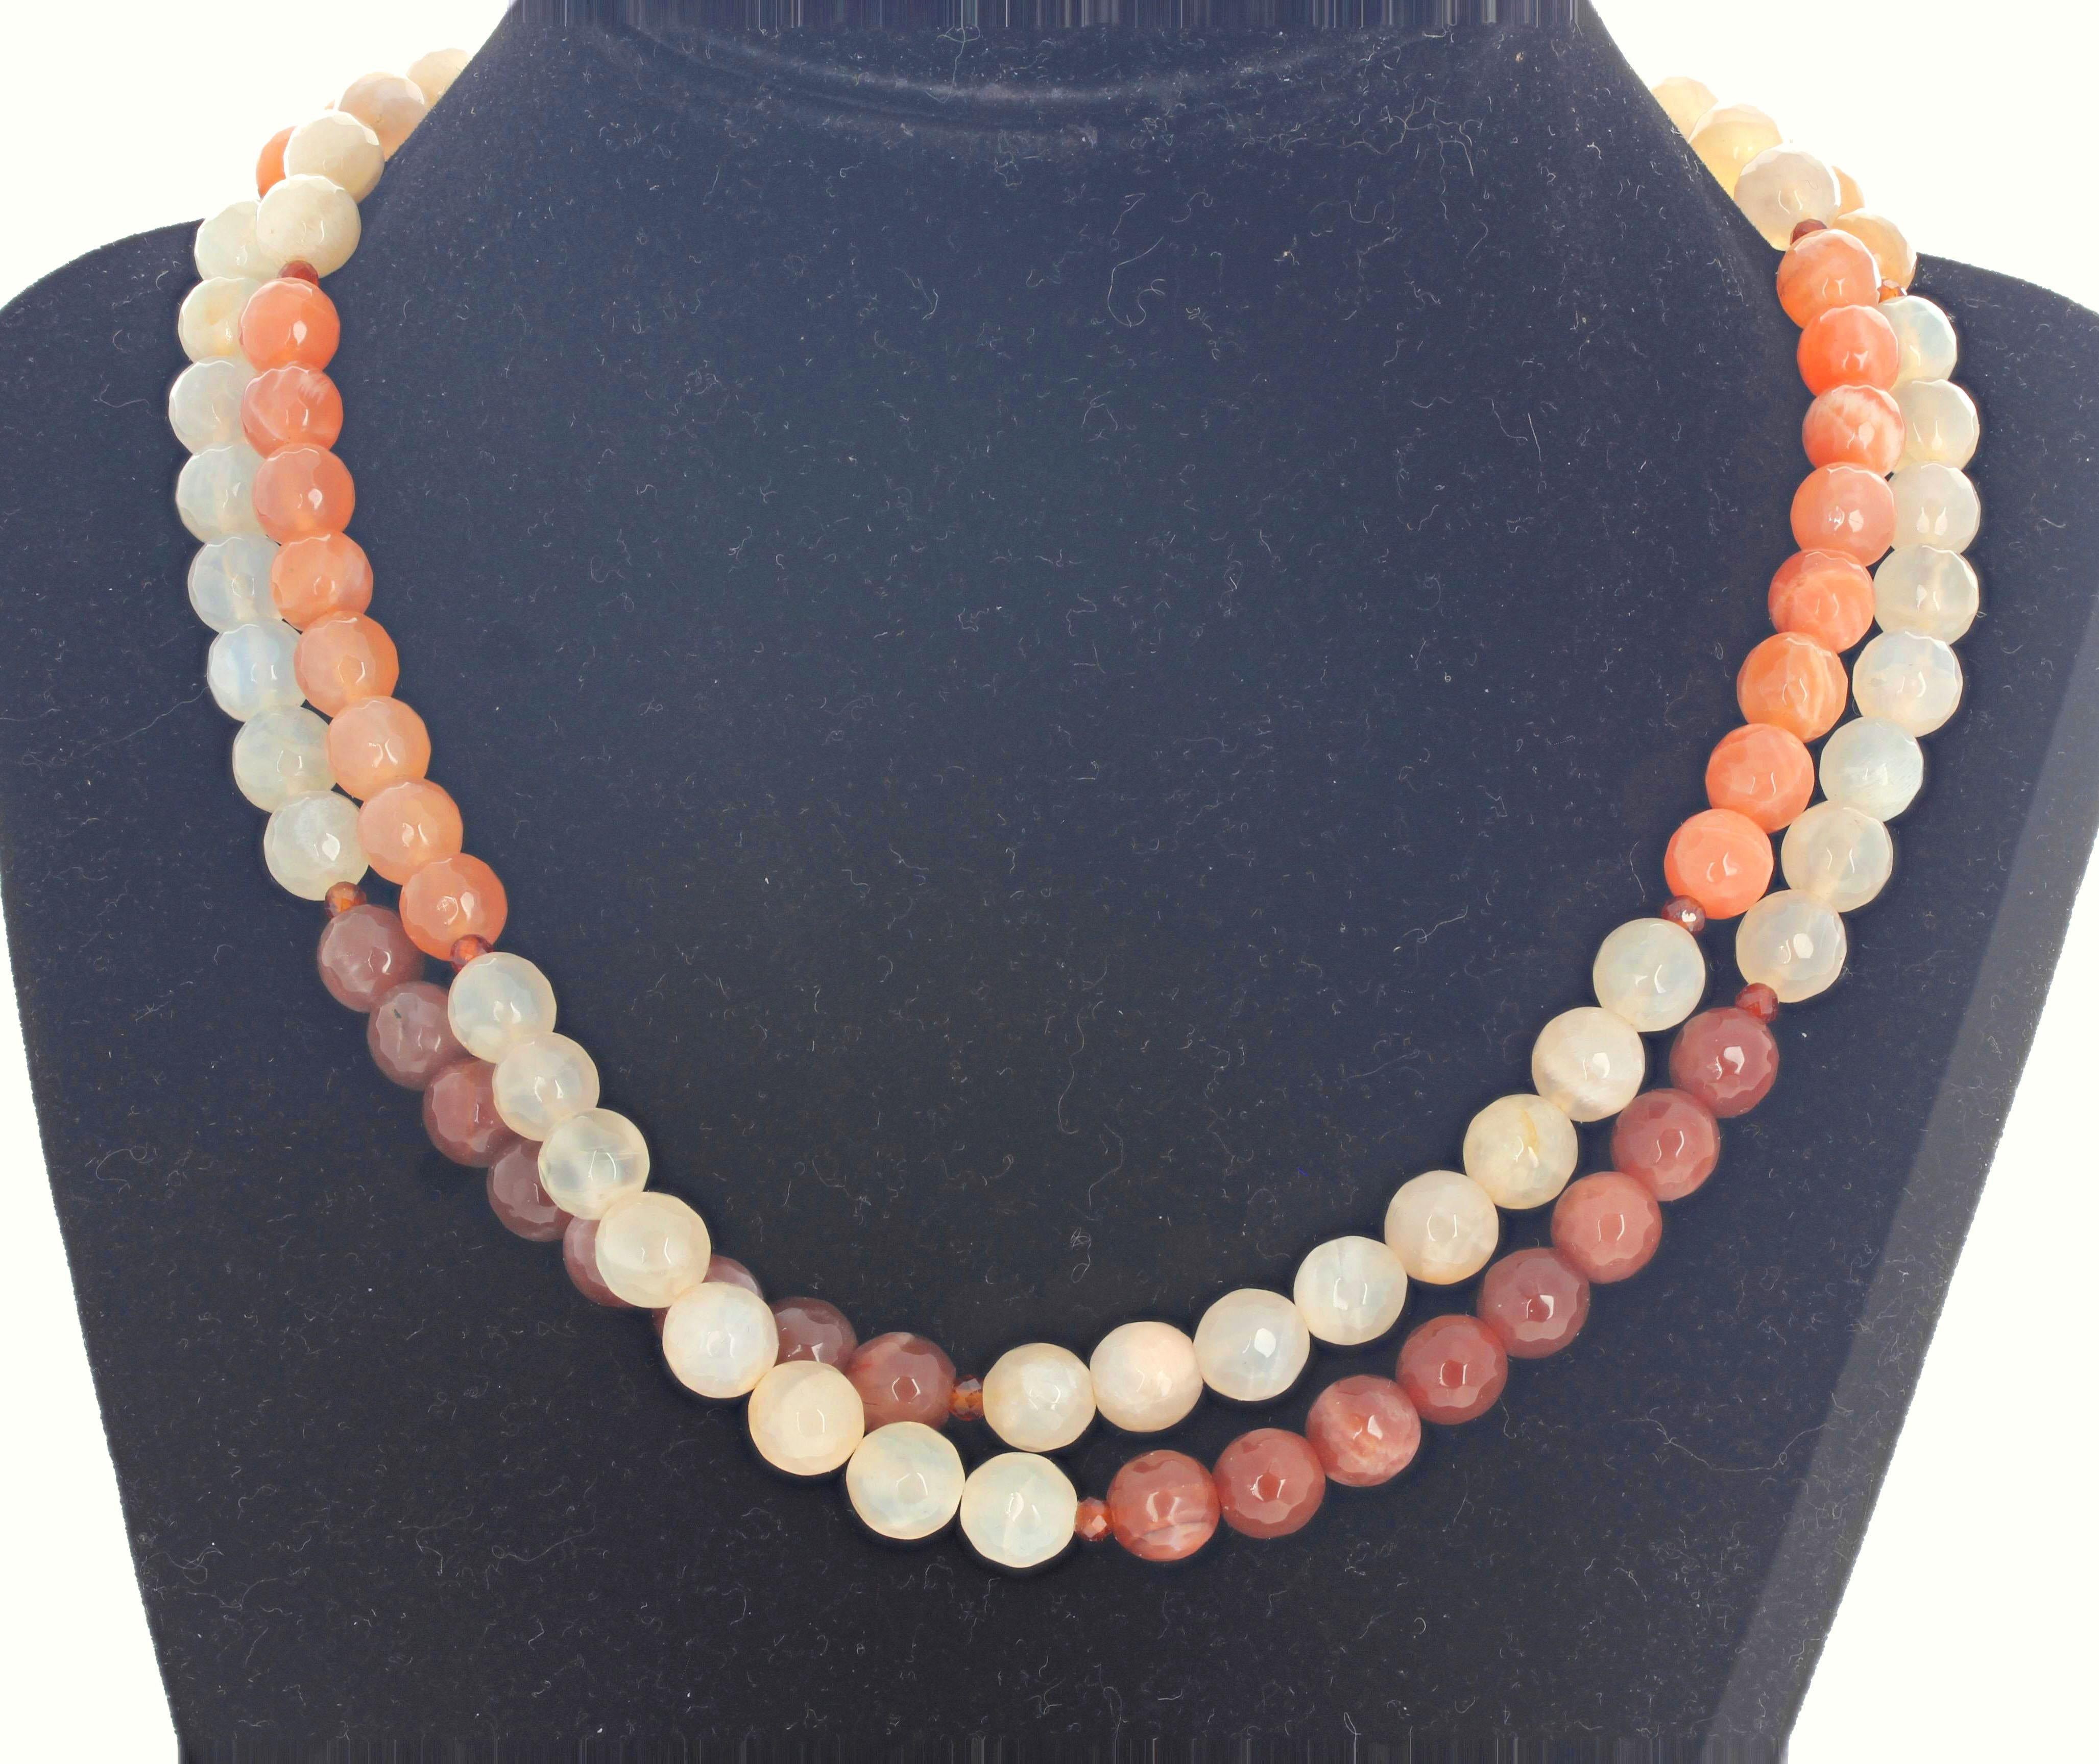 Double strand of natural checkerboard highly polished Moonstone - Creamy, pinky-orangy, and light chocolate brown - enhanced with sparkling little Hessonite garnets set in this double strand 17 inch necklace with gold plated (vermeil) easy to use